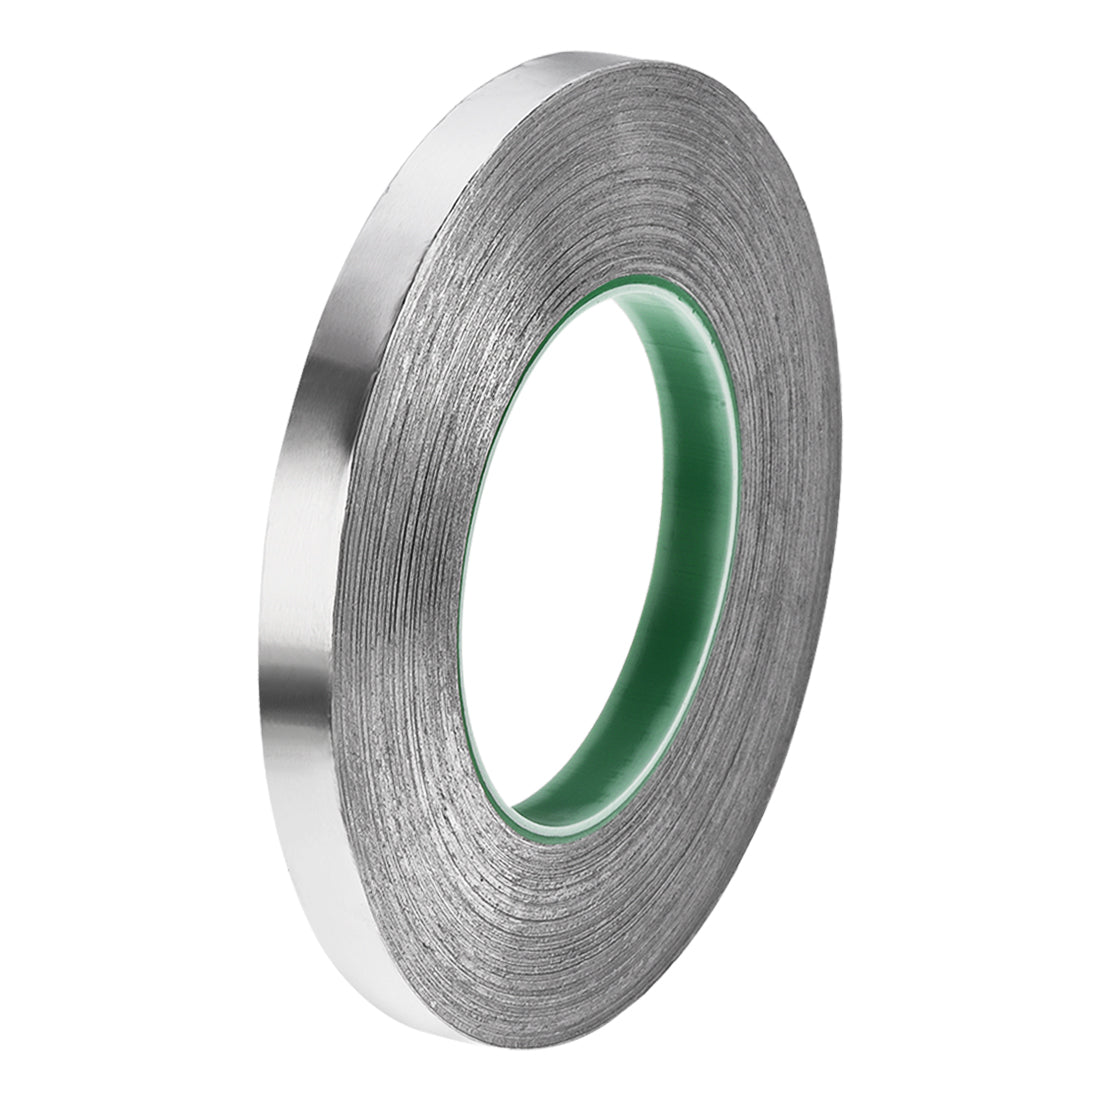 uxcell Uxcell 12mm Aluminum Foil Tape for HVAC,Patching Hot and Cold Air Ducts 50m/164ft